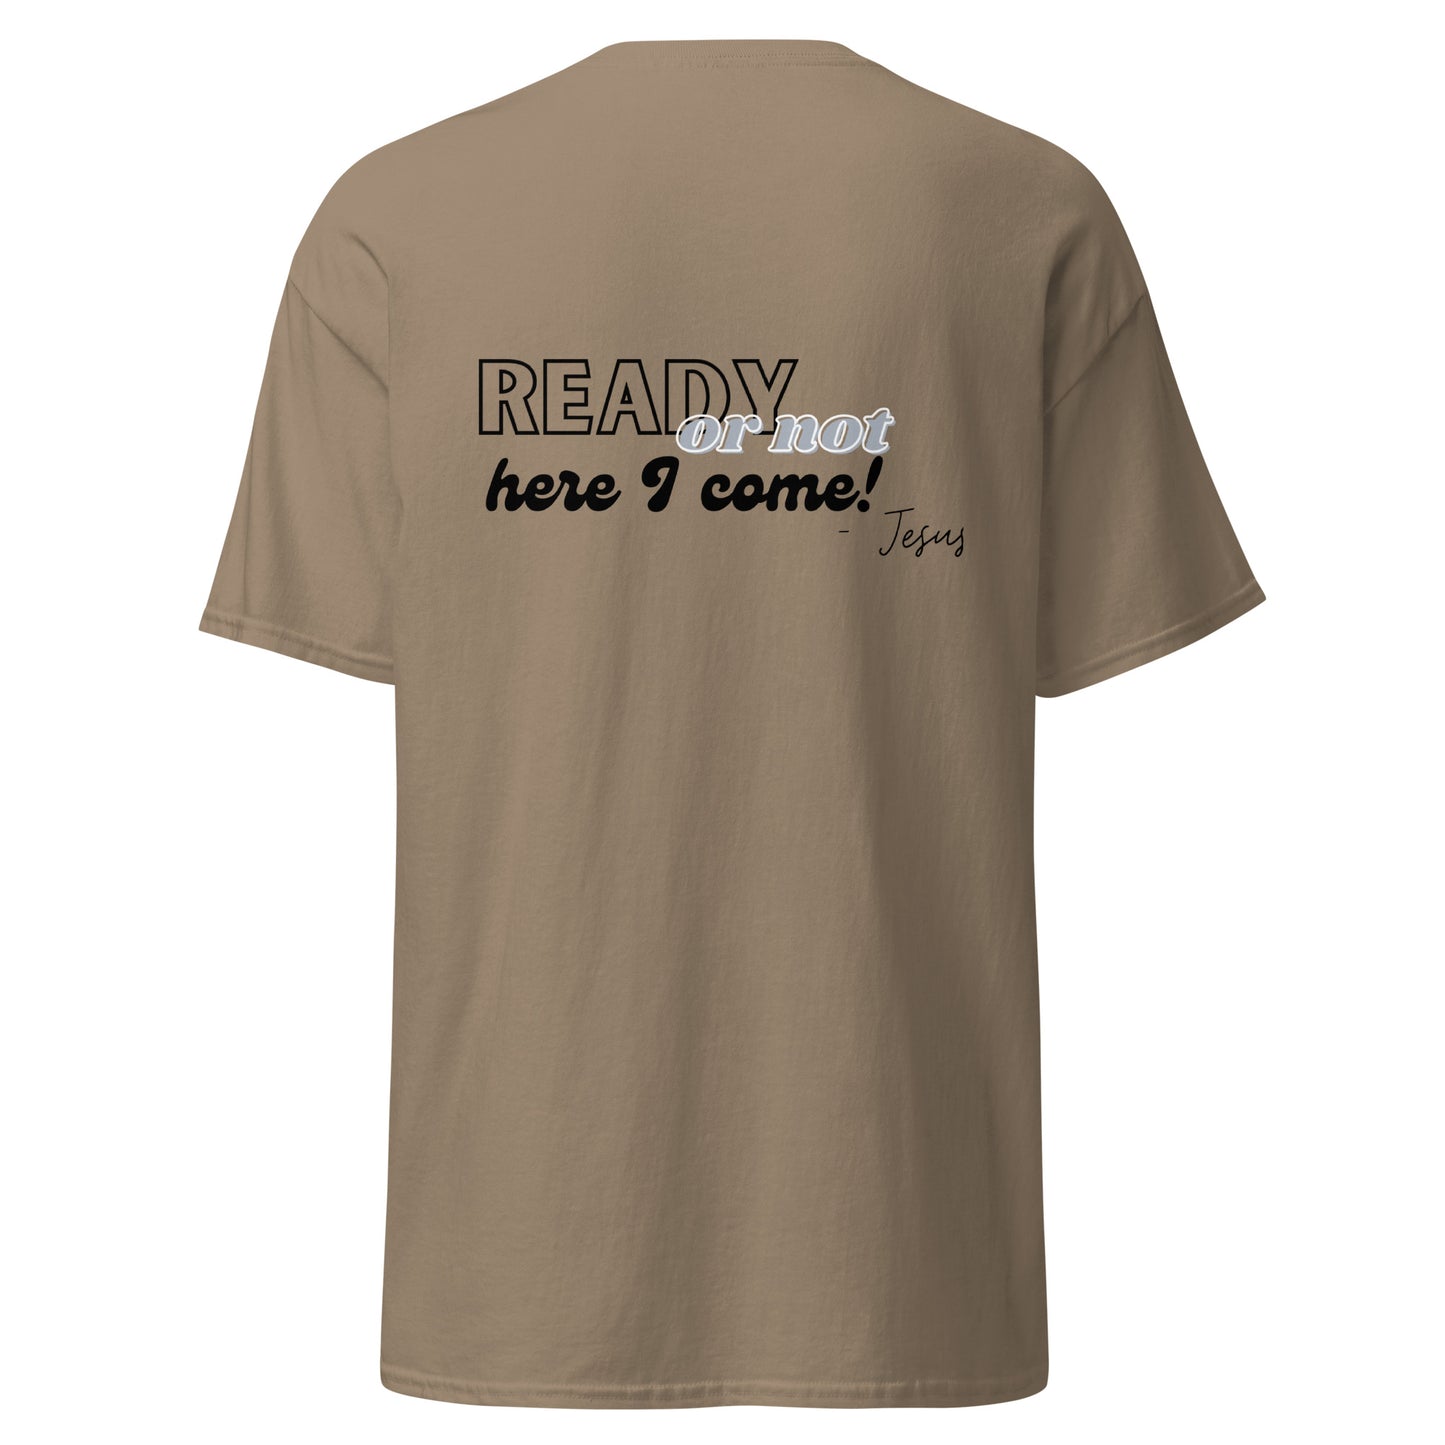 Ready or not T shirt